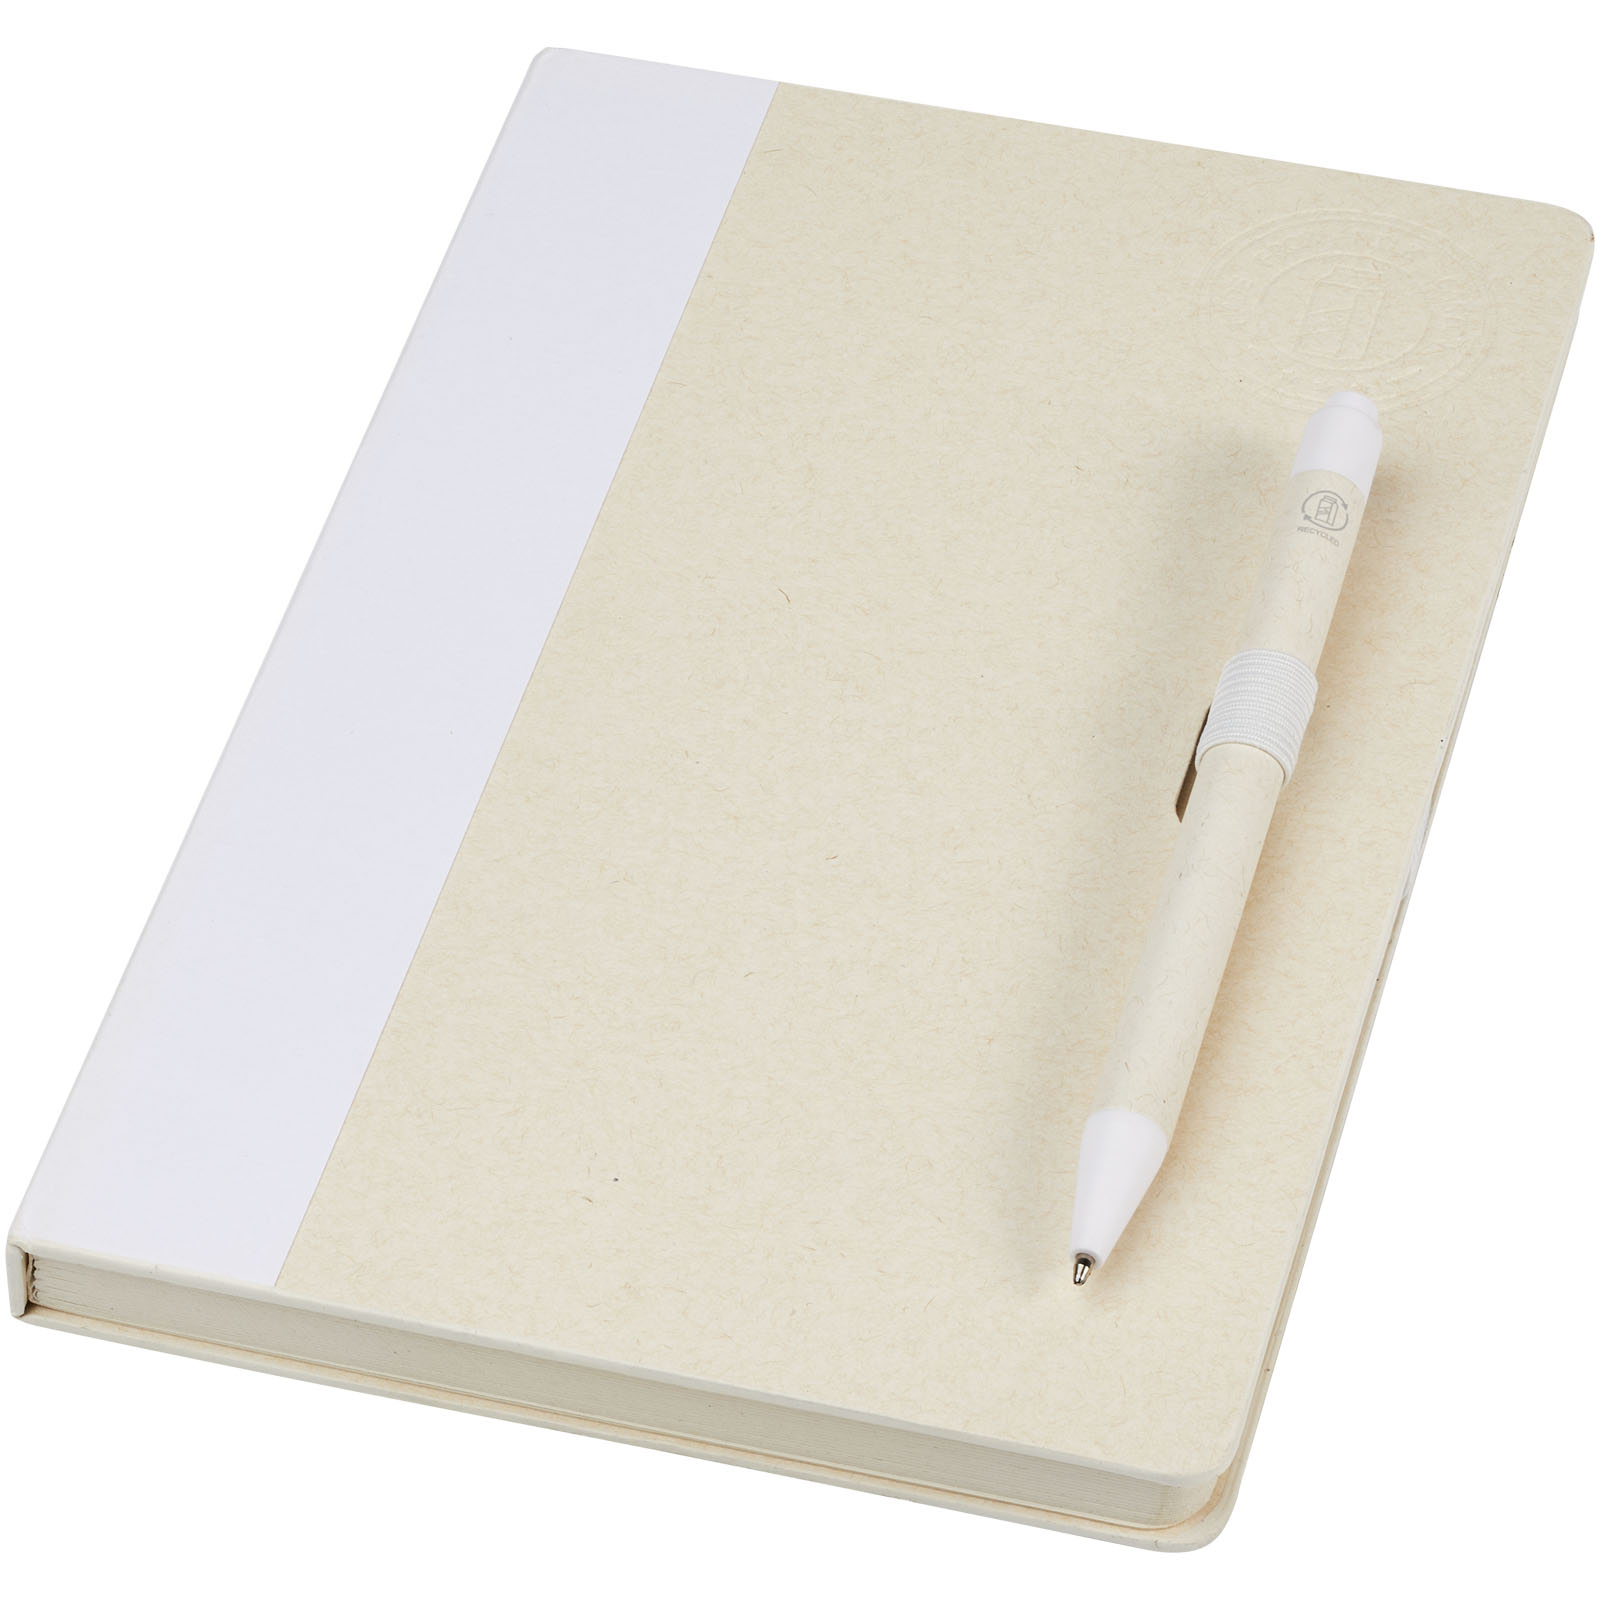 Advertising Hard cover notebooks - Dairy Dream A5 size reference recycled milk cartons notebook and ballpoint pen set - 0